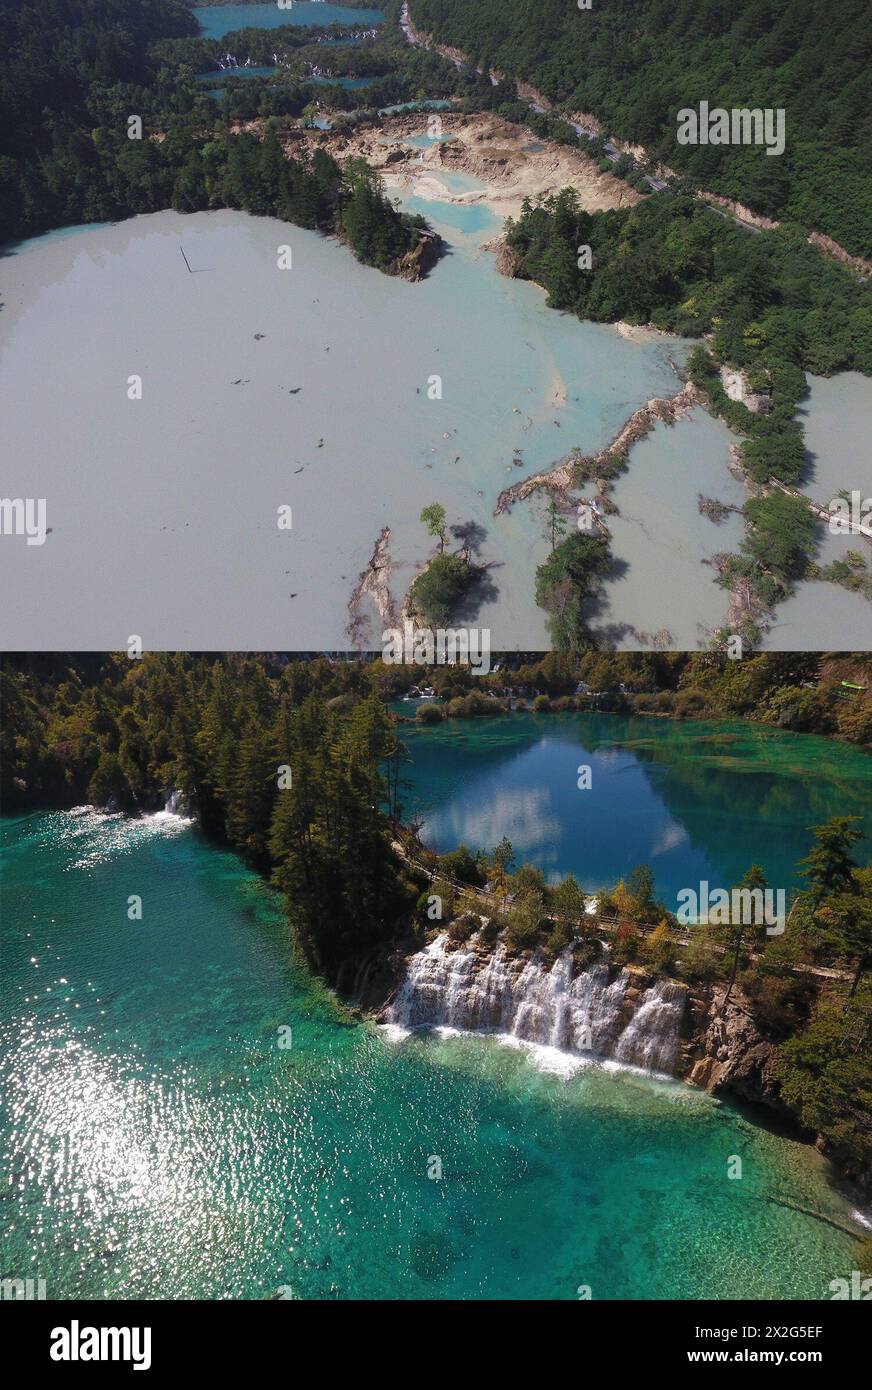 (240422) -- CHENGDU, April 22, 2024 (Xinhua) -- This combo file photo shows a view of the Jiuzhaigou scenic area of southwest China's Sichuan Province before (above, photo taken in 2018) and after (photo taken in 2023) restoration. Jiuzhaigou National Park, a UNESCO World Heritage site famous for its spectacular waterfalls, lush forests and serene plateau lakes, was hit by a 7.0-magnitude quake on Aug. 8, 2017. After the earthquake, a team led by professor Pei Xiangjun from Chengdu University of Technology carried out protection and restoration work of the natural heritage site. After year Stock Photo